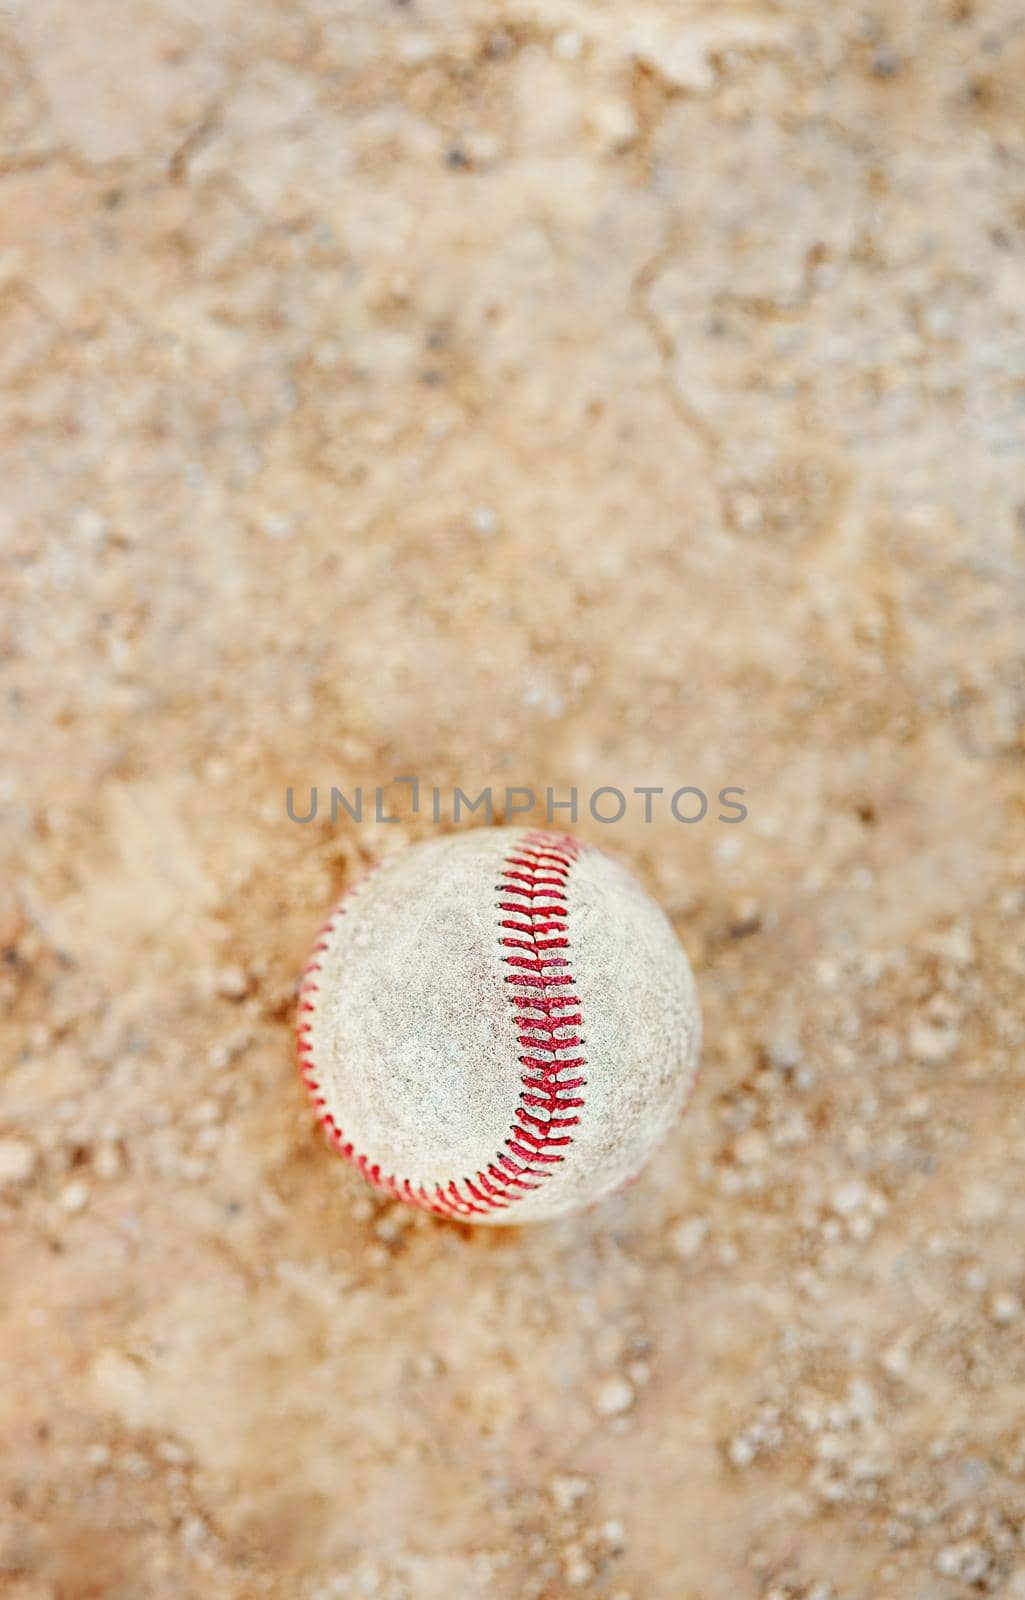 Still life shot of a baseball ball on the pitch outdoors during the day